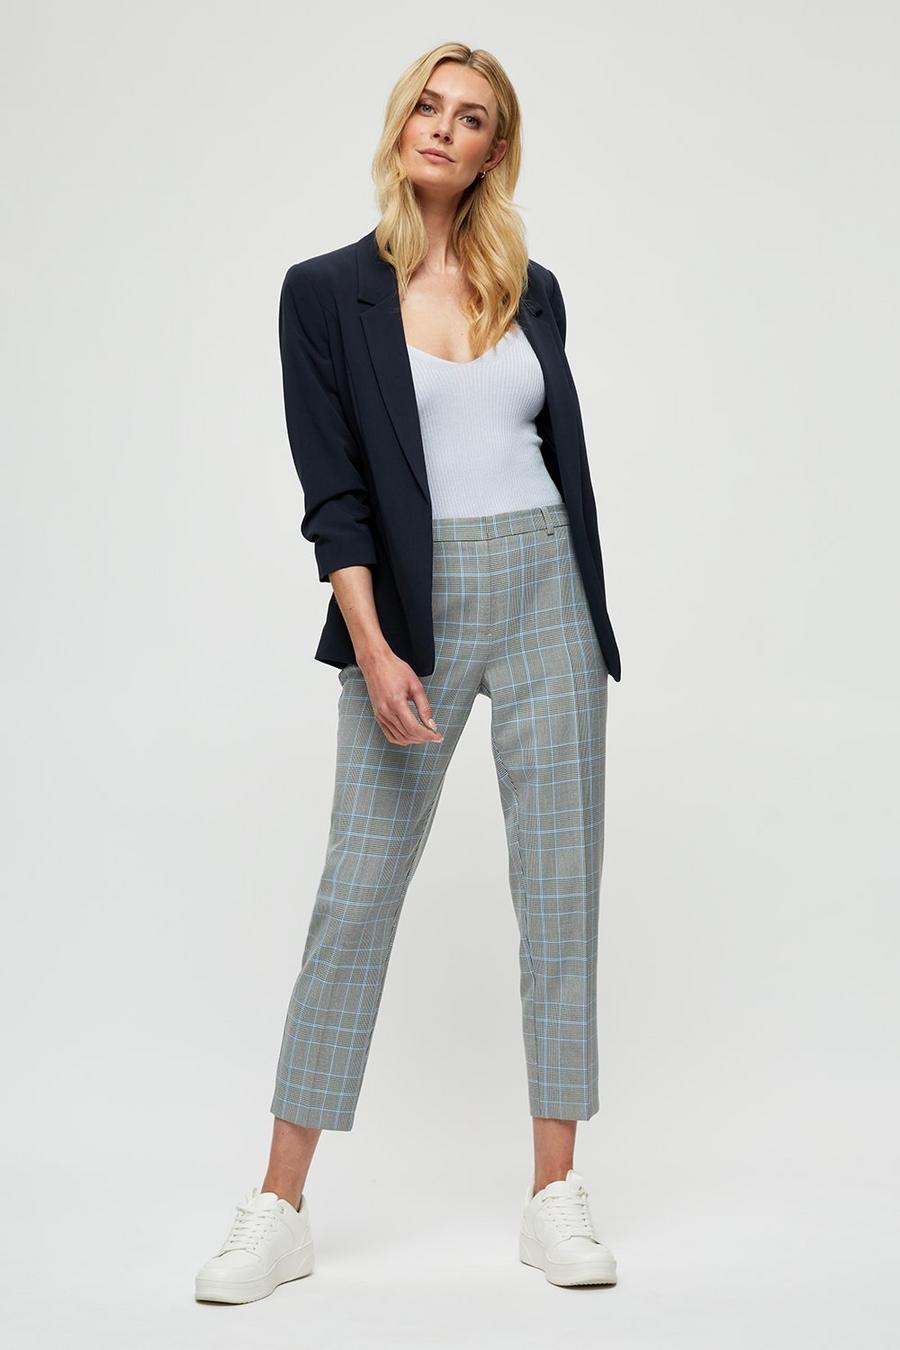 Blue Grey Check Ankle Grazer Trousers